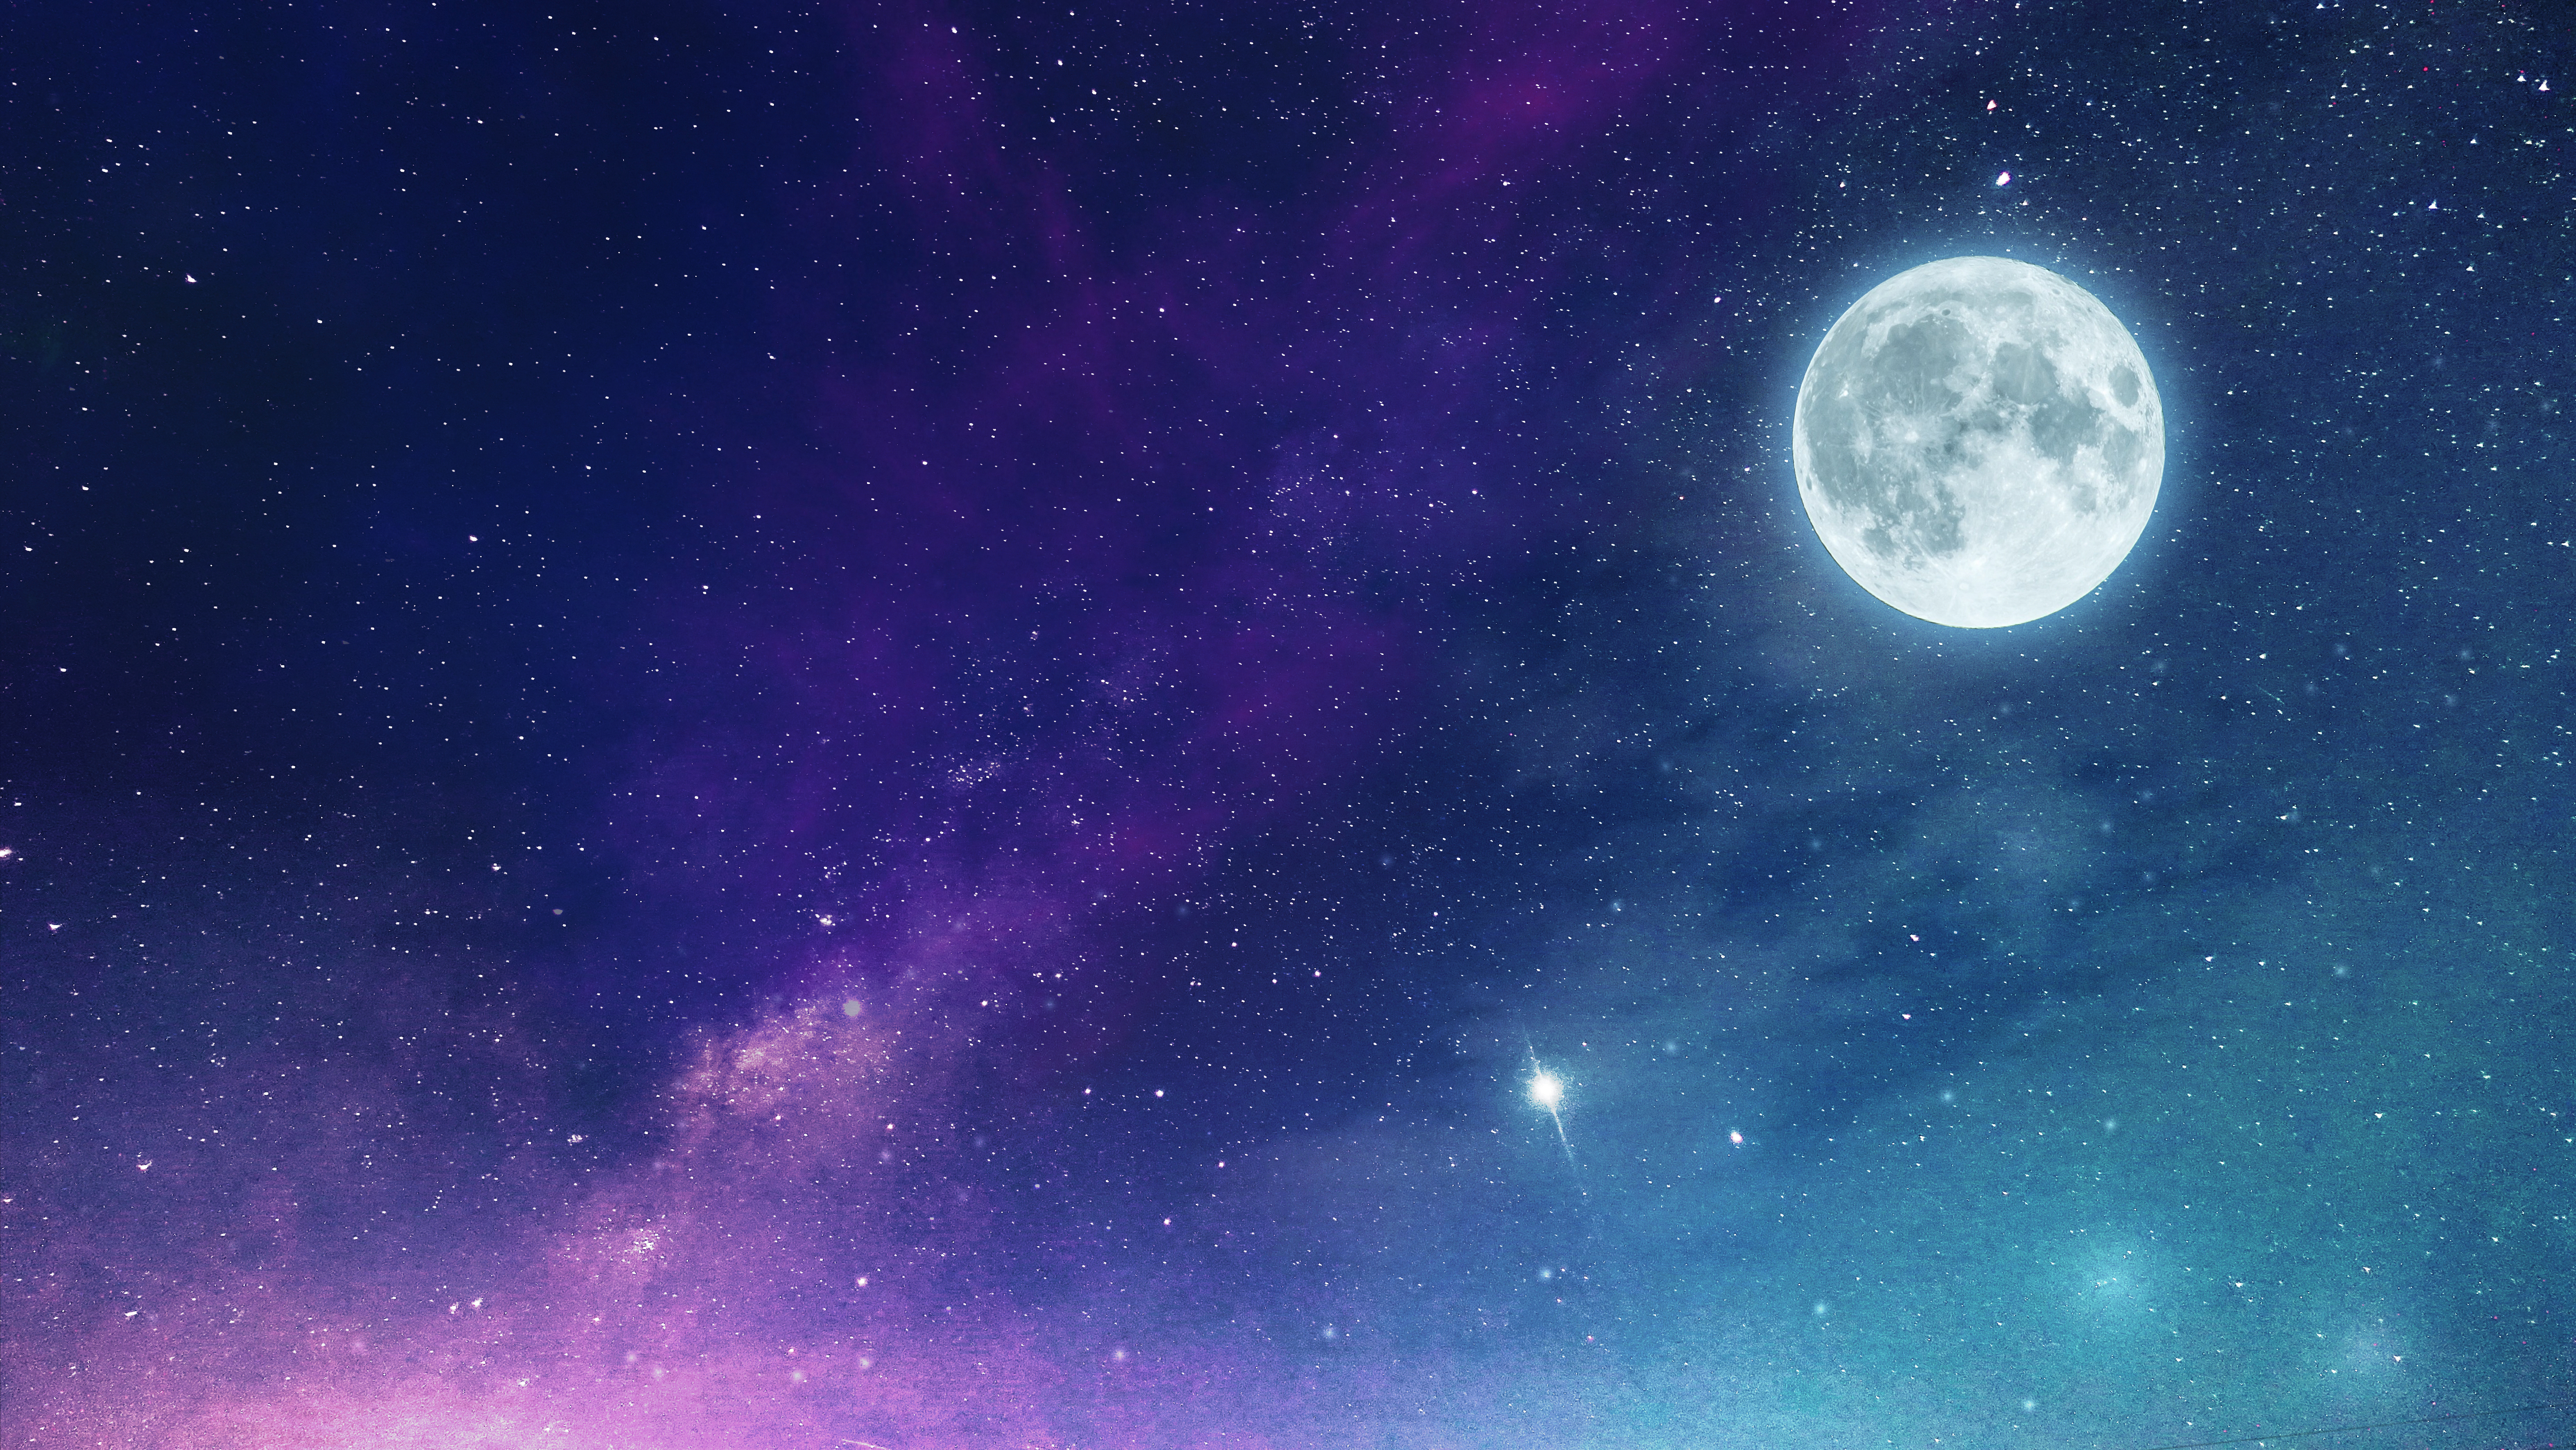 A moon in a blue and purple starry night sky